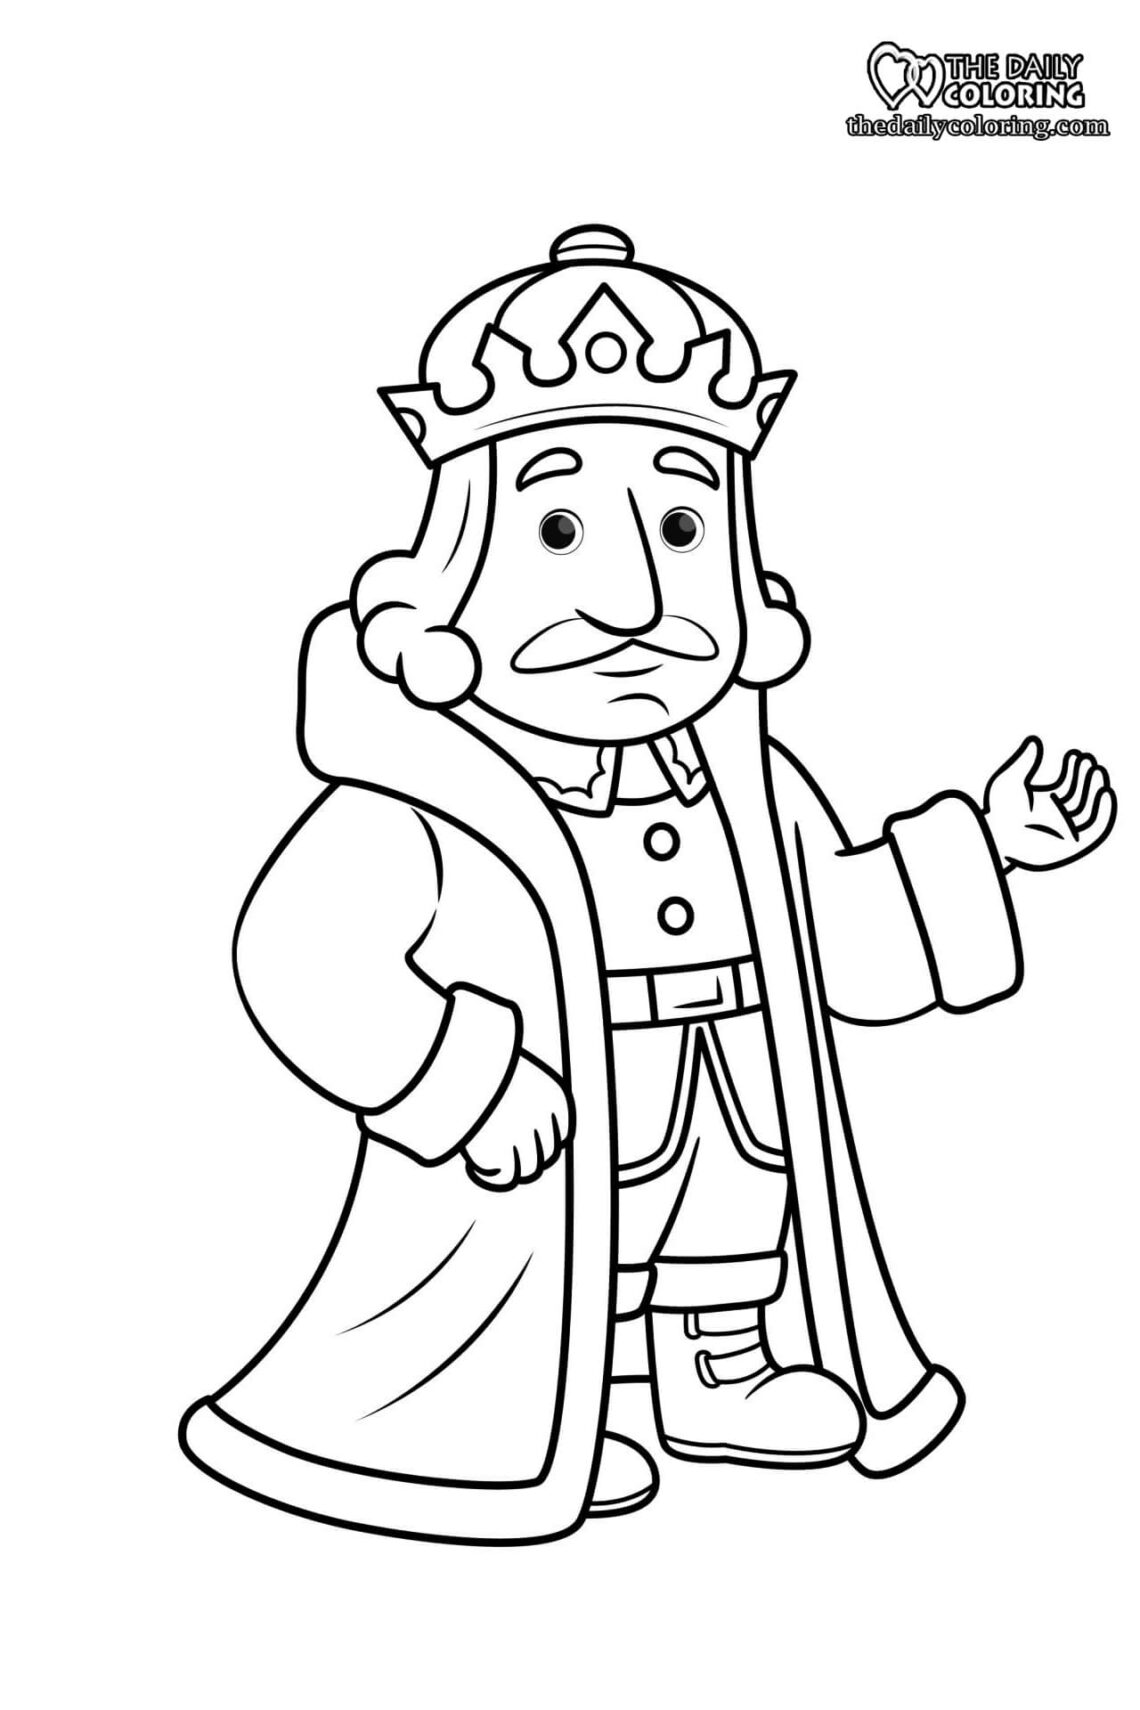 Coloring Clipart King Picture 761857 Coloring Clipart King | Images and ...